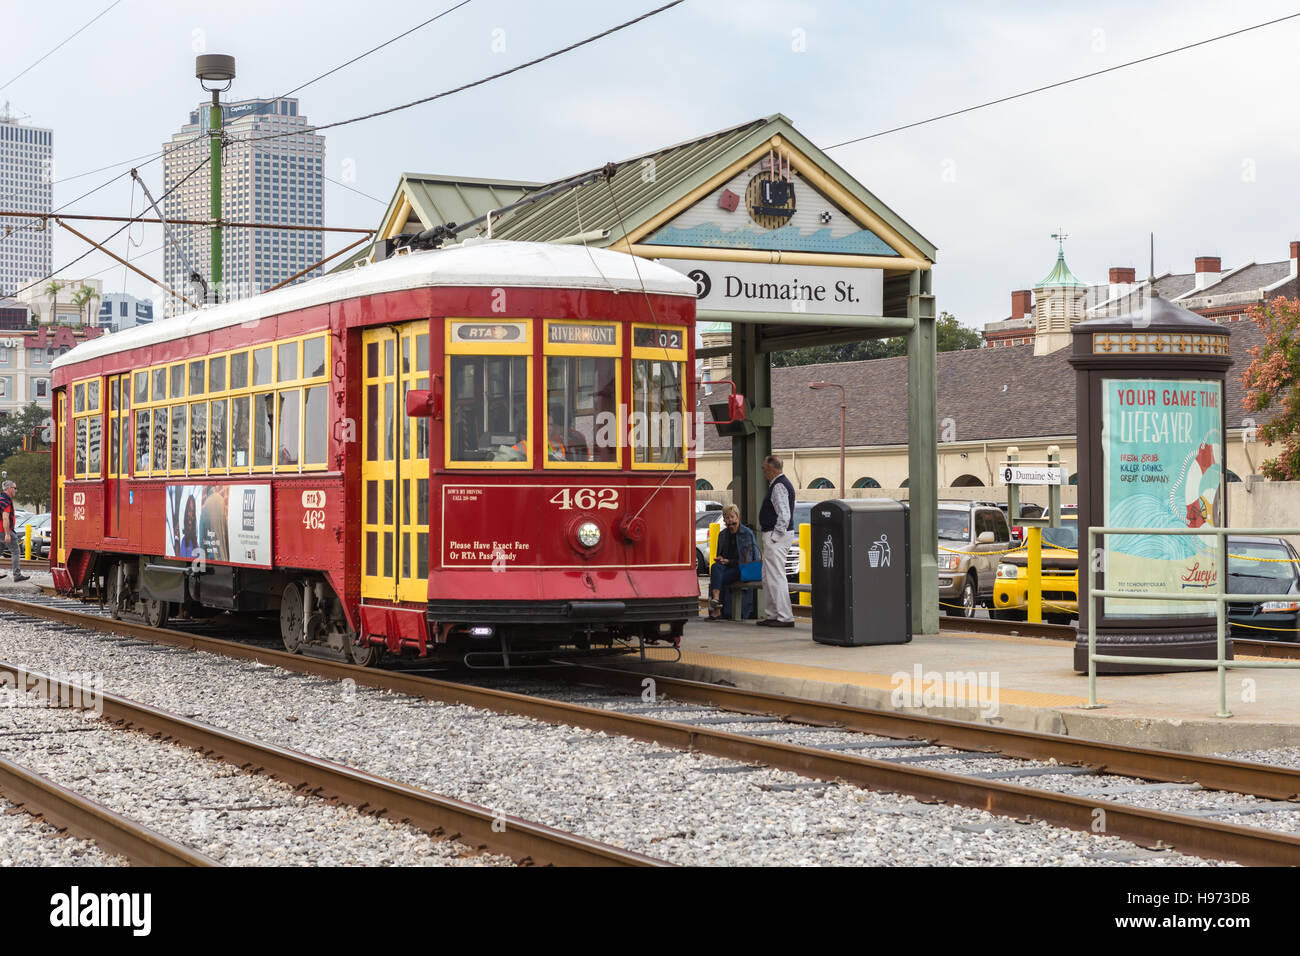 Passengers board an RTA streetcar at the Dumaine Street station on the Riverfront Line in New Orleans, Louisiana. Stock Photo